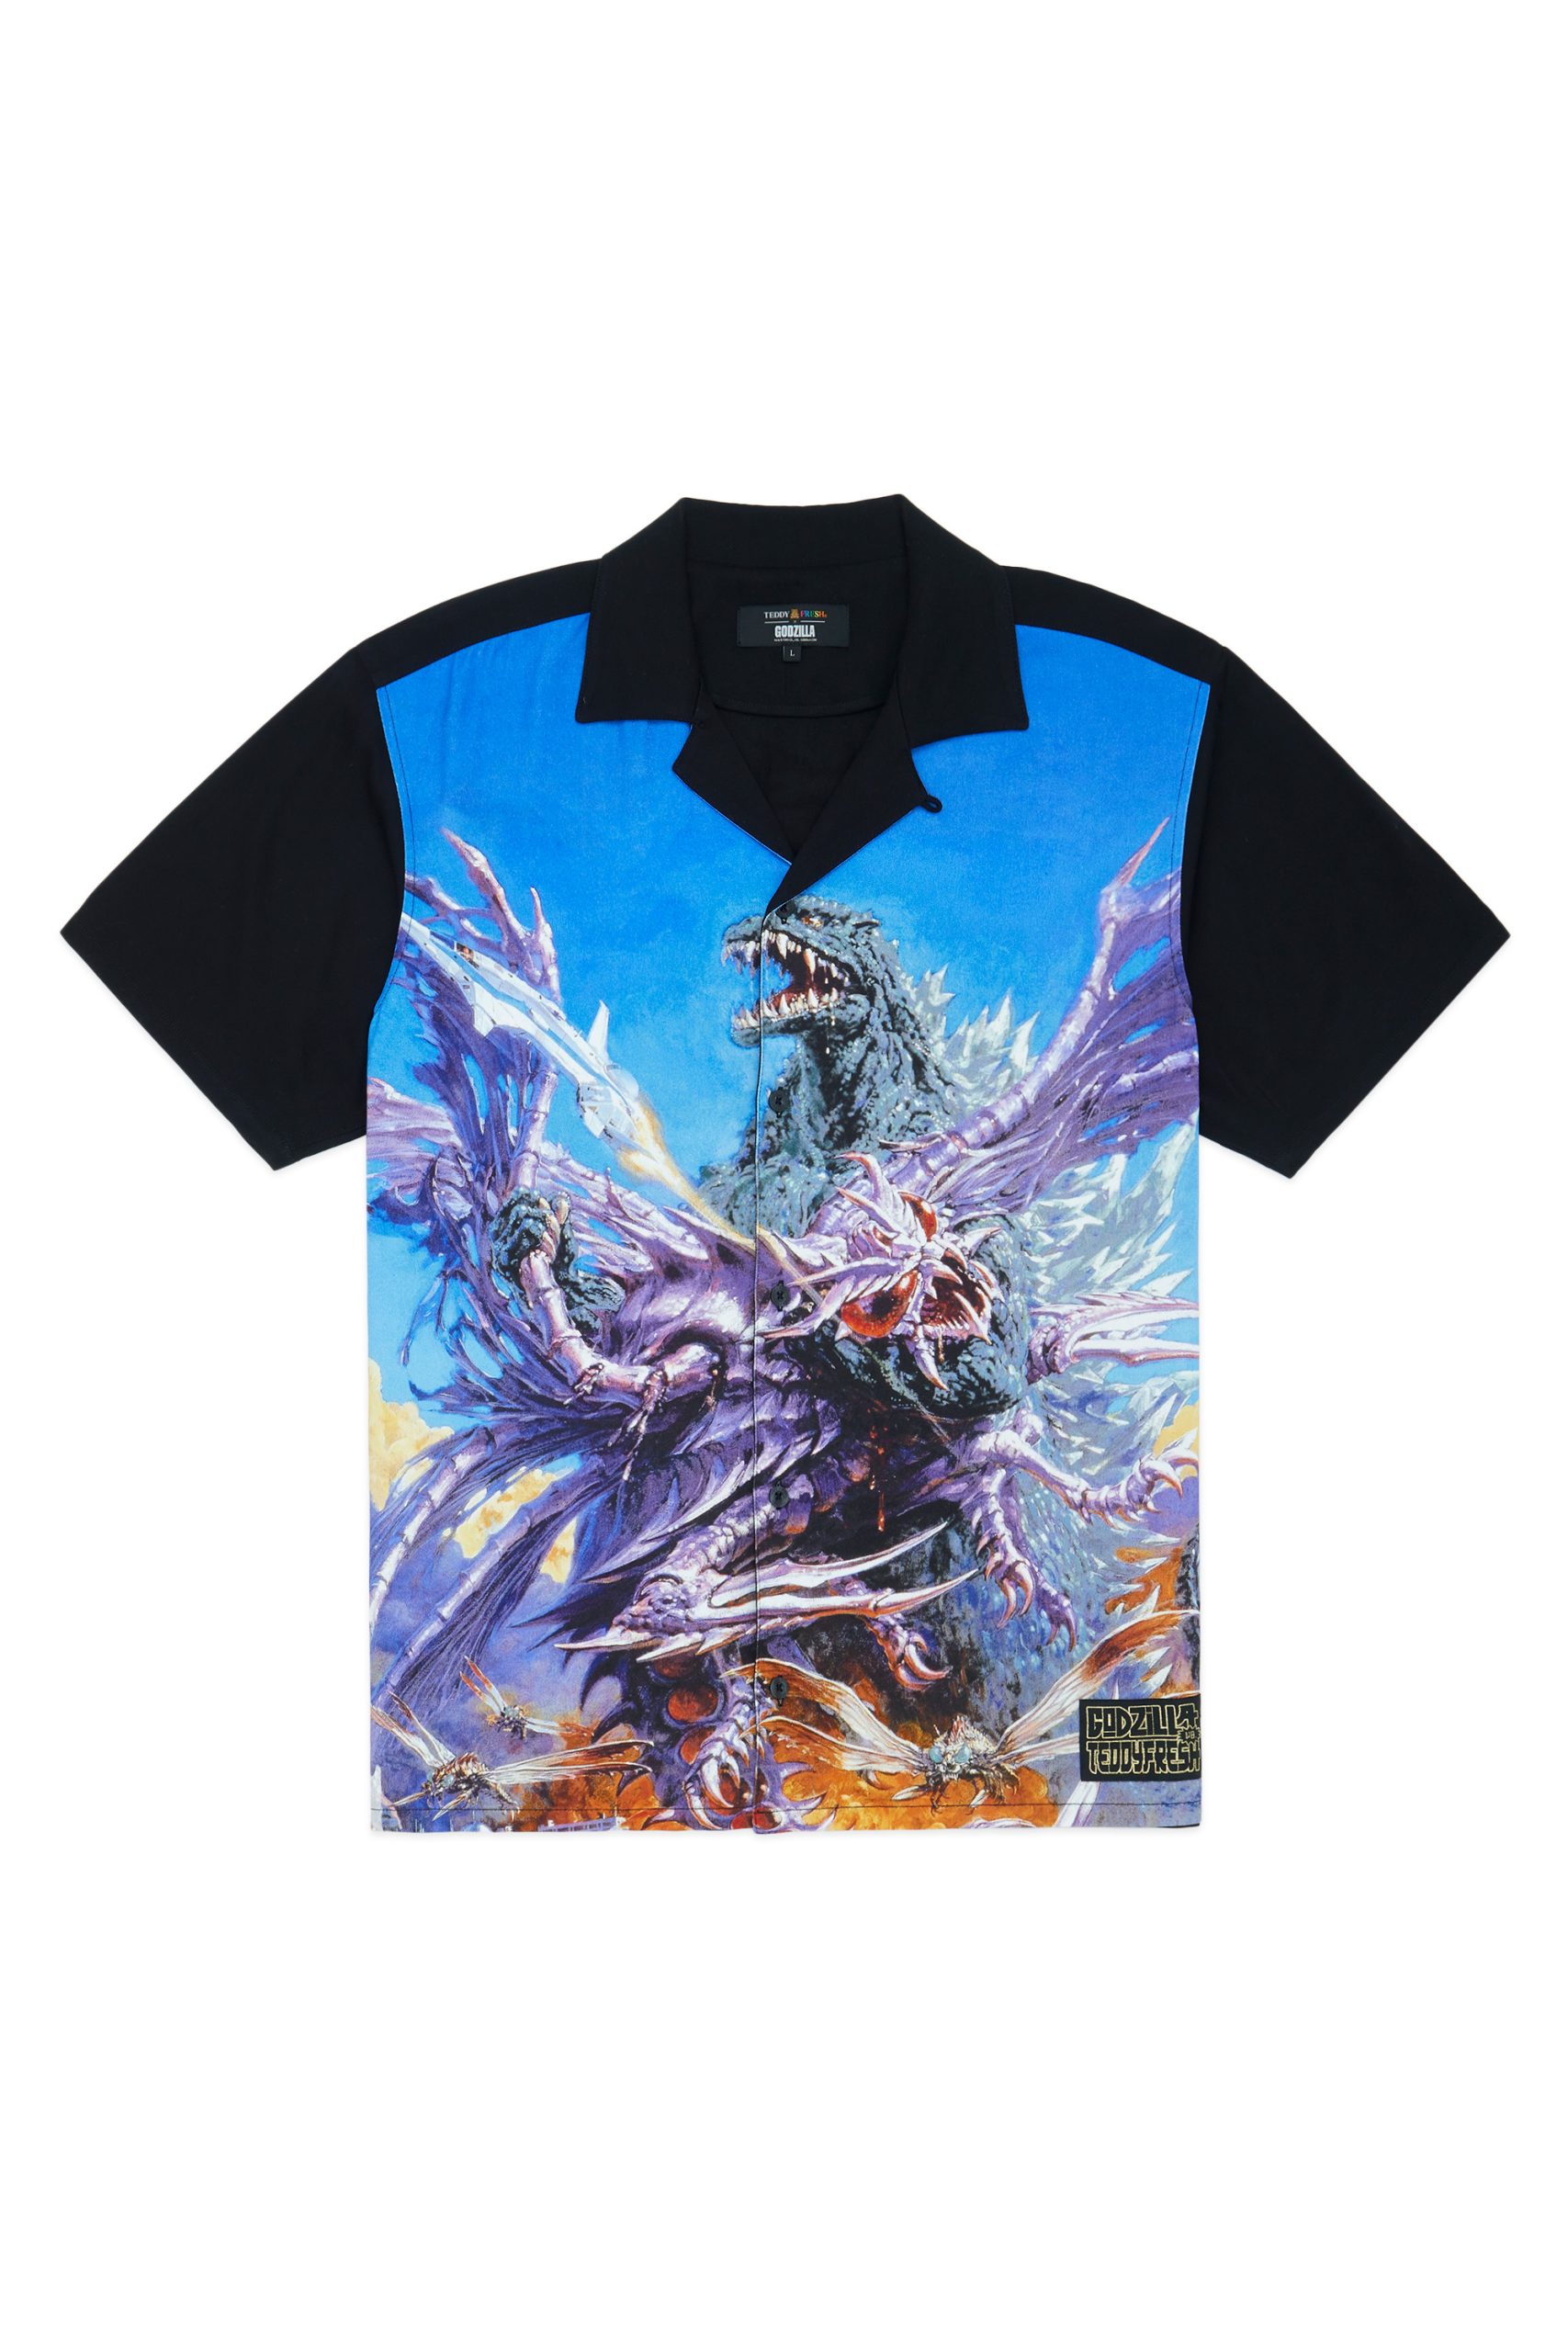 Toho Is Teaming Up With Teddy Fresh For A New Godzilla Capsule Collection —  Fashion and Fandom